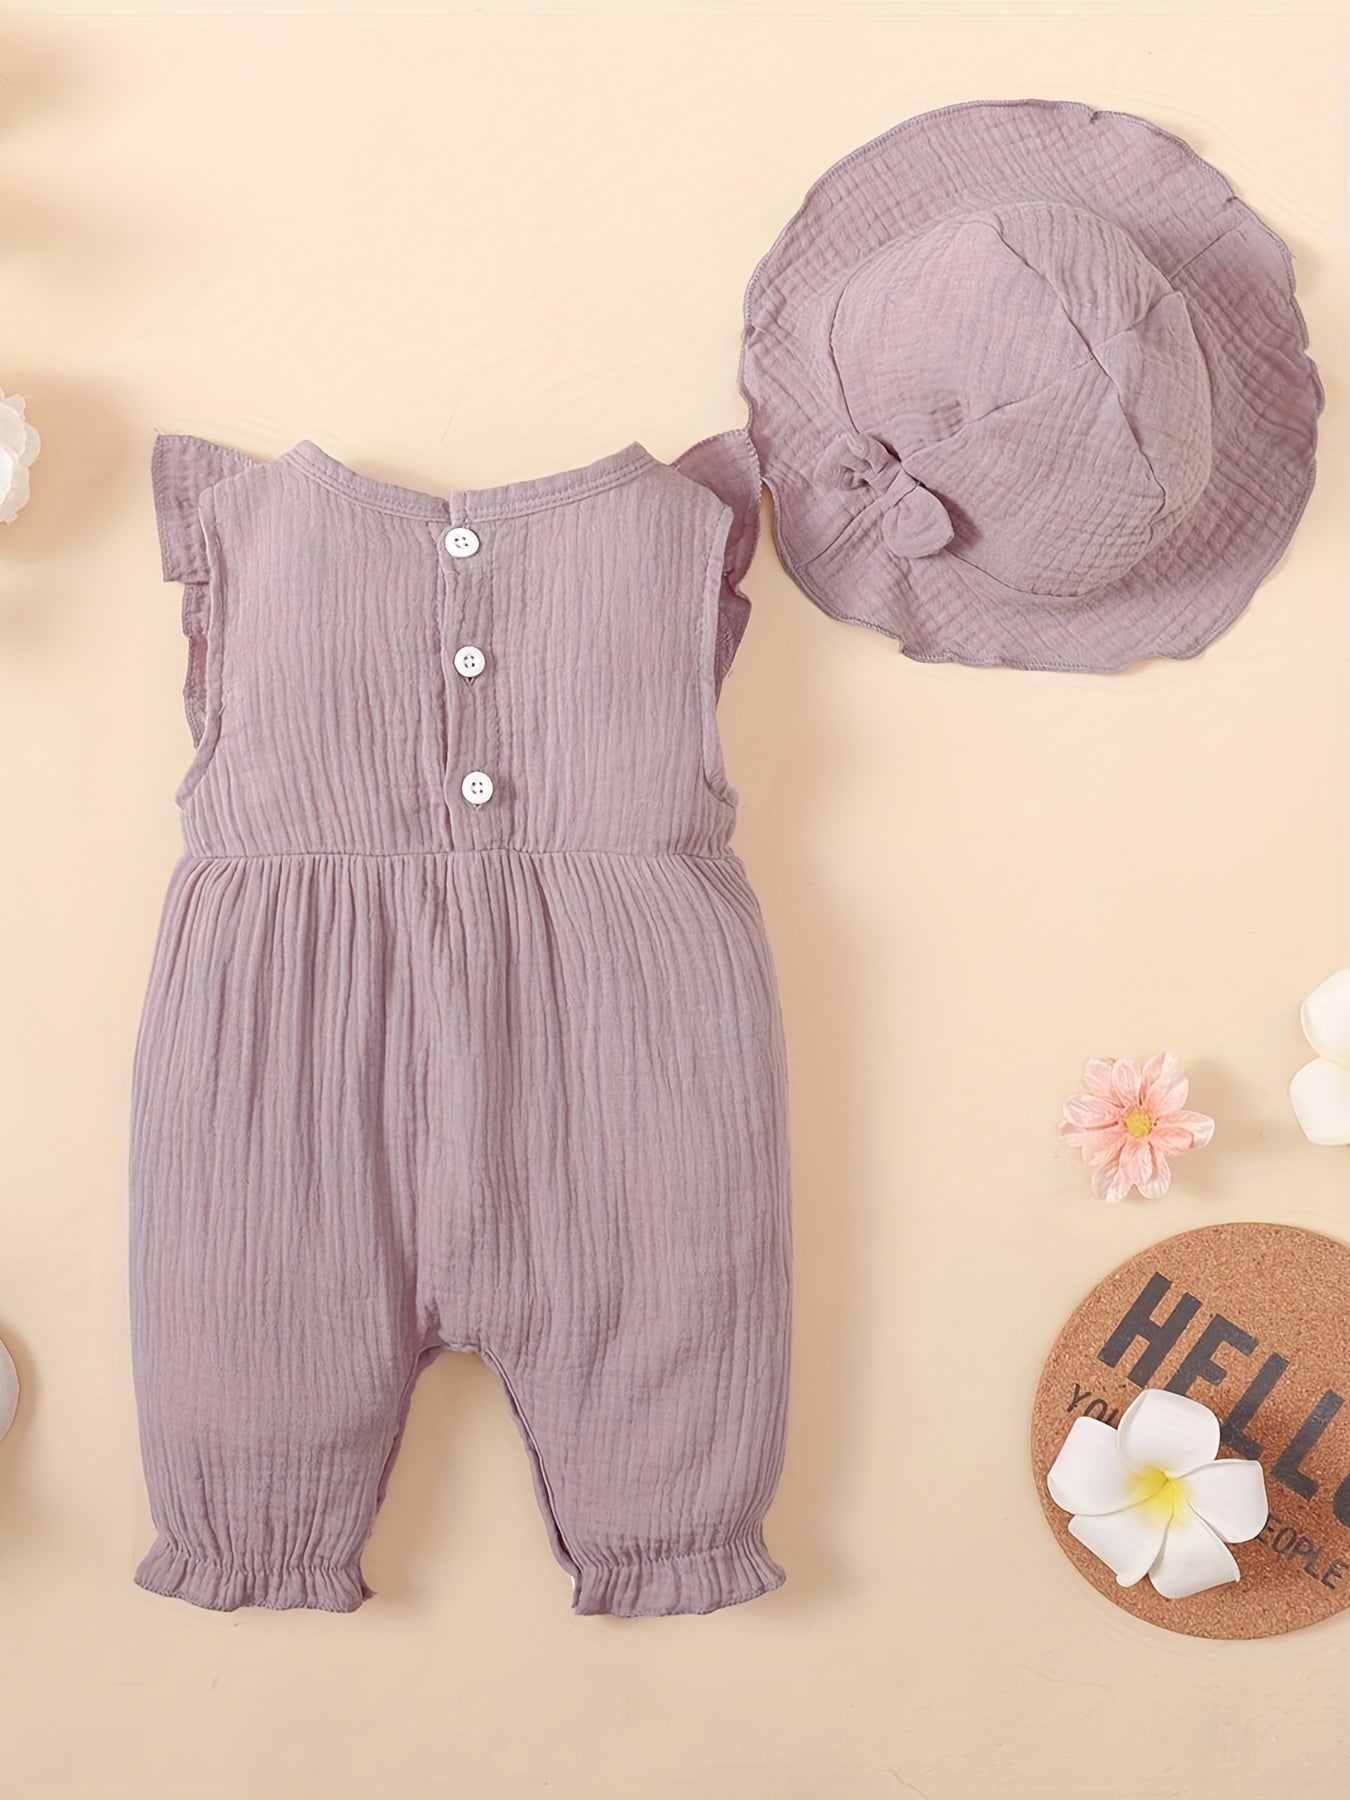 Stay Cool In Summer: 2pcs Baby Girl's Cotton Romper With Hat Set